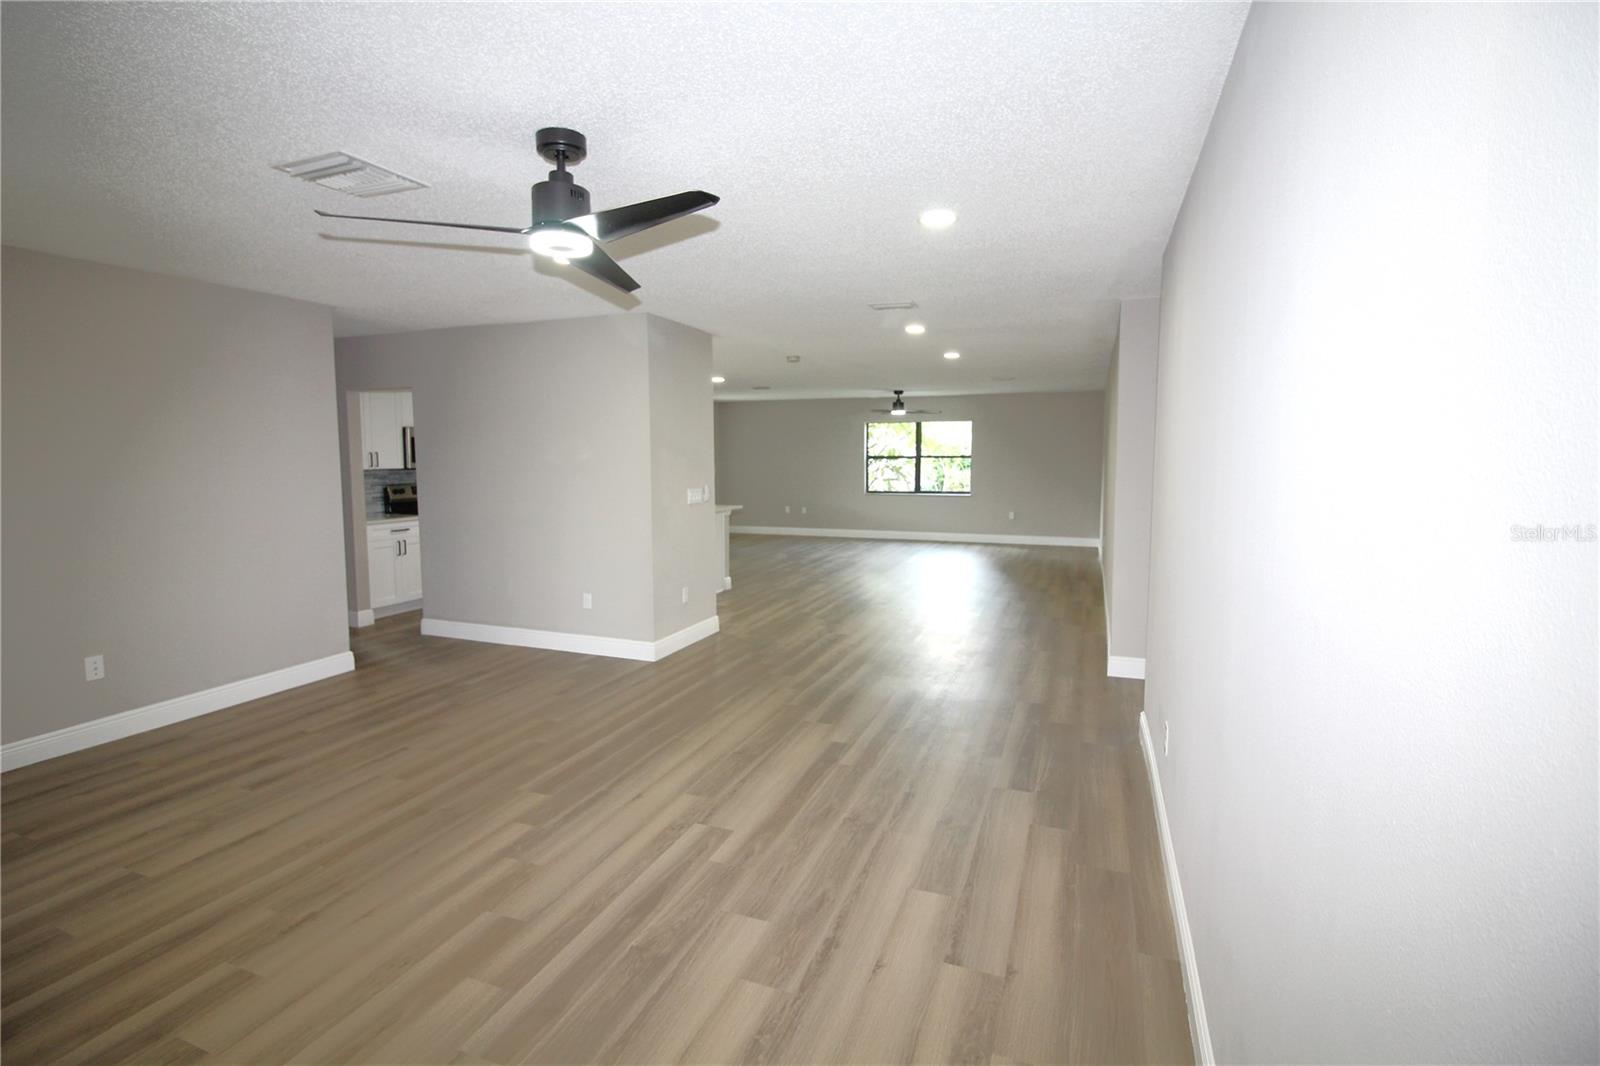 Look from living room to dining/family room